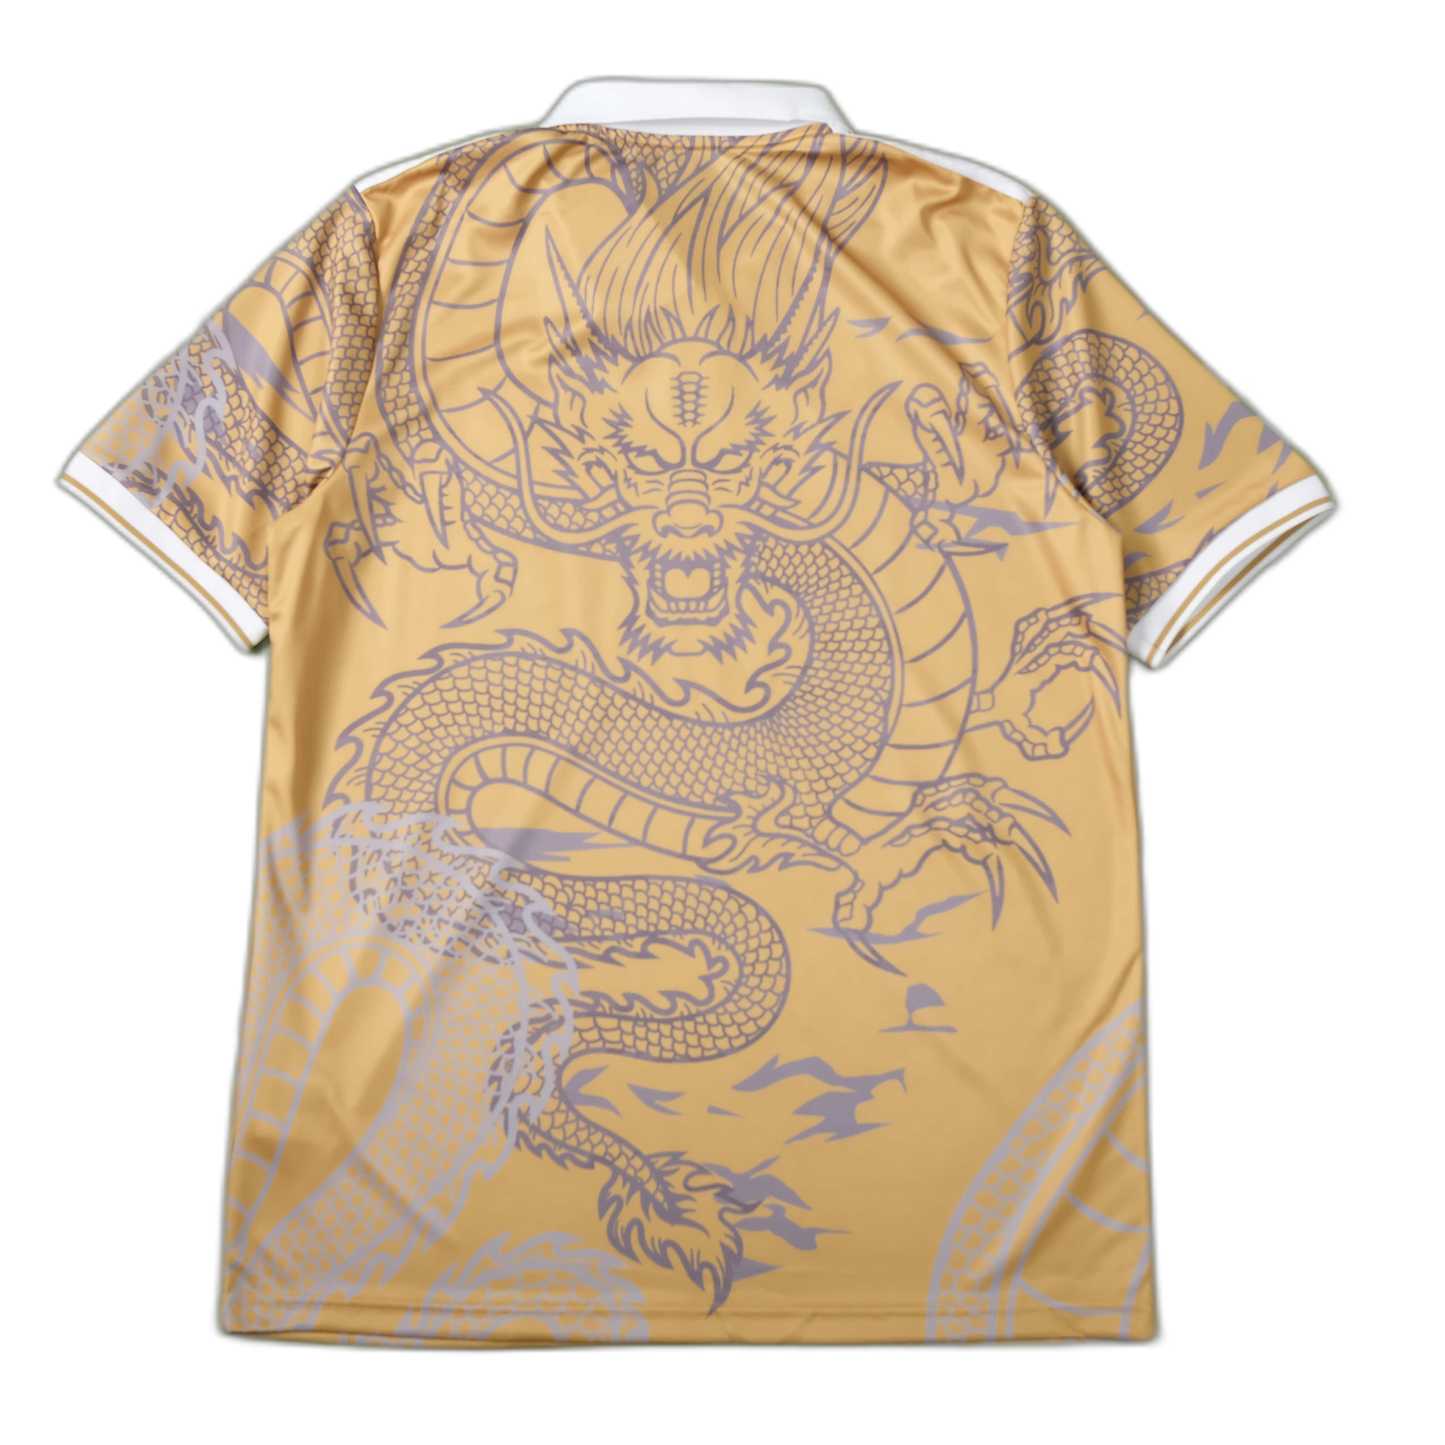 Real Madrid 23/24 "Gold Dragon" Jersey